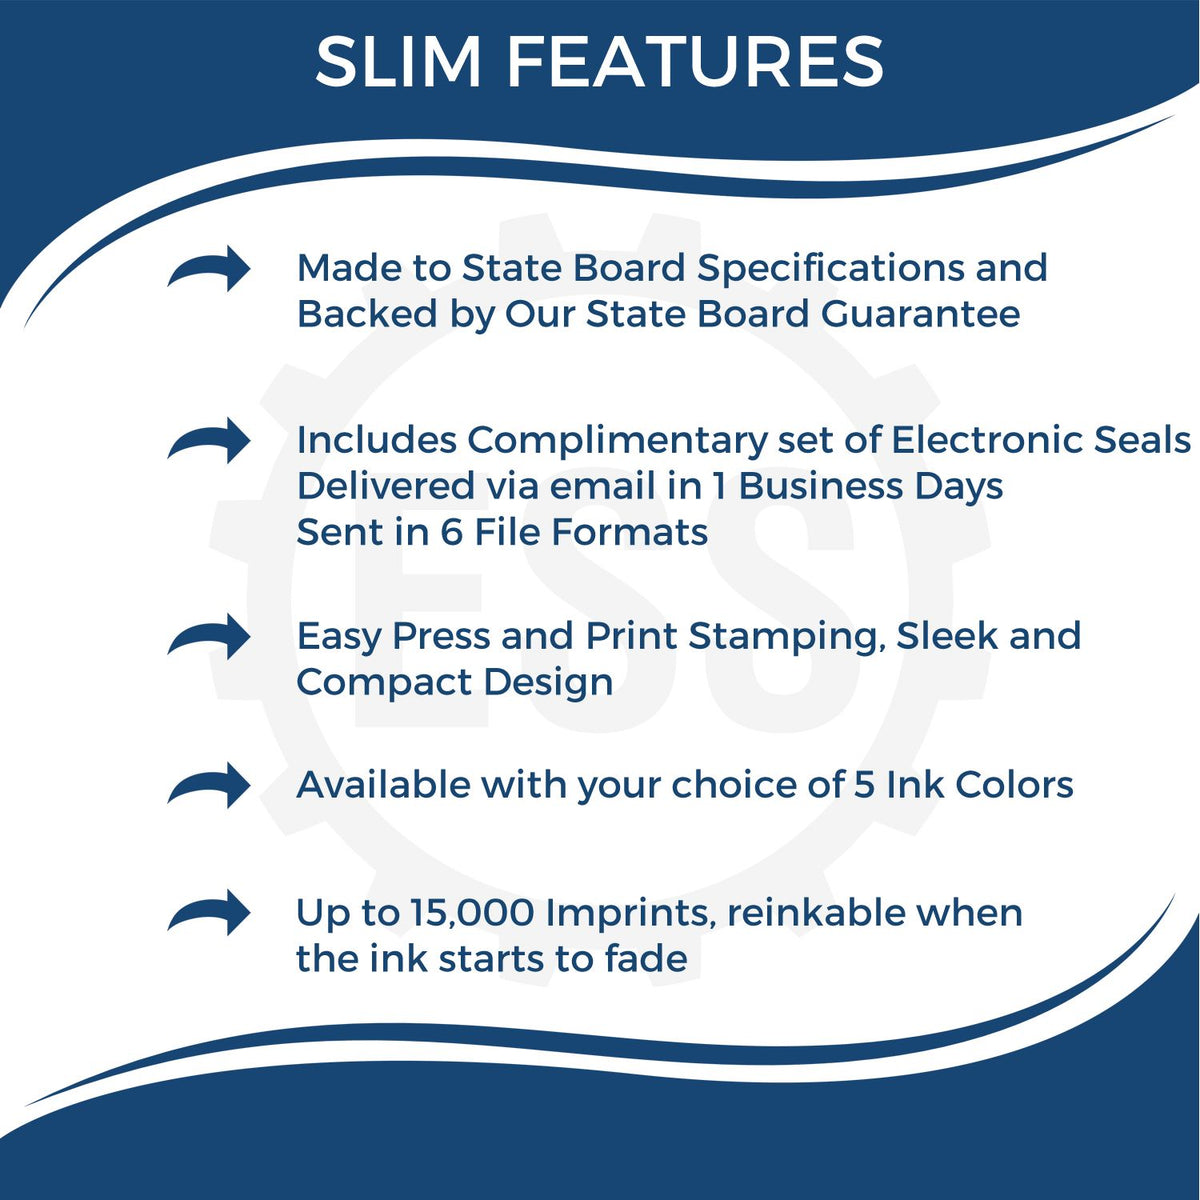 A picture of an infographic highlighting the selling points for the Super Slim Rhode Island Notary Public Stamp